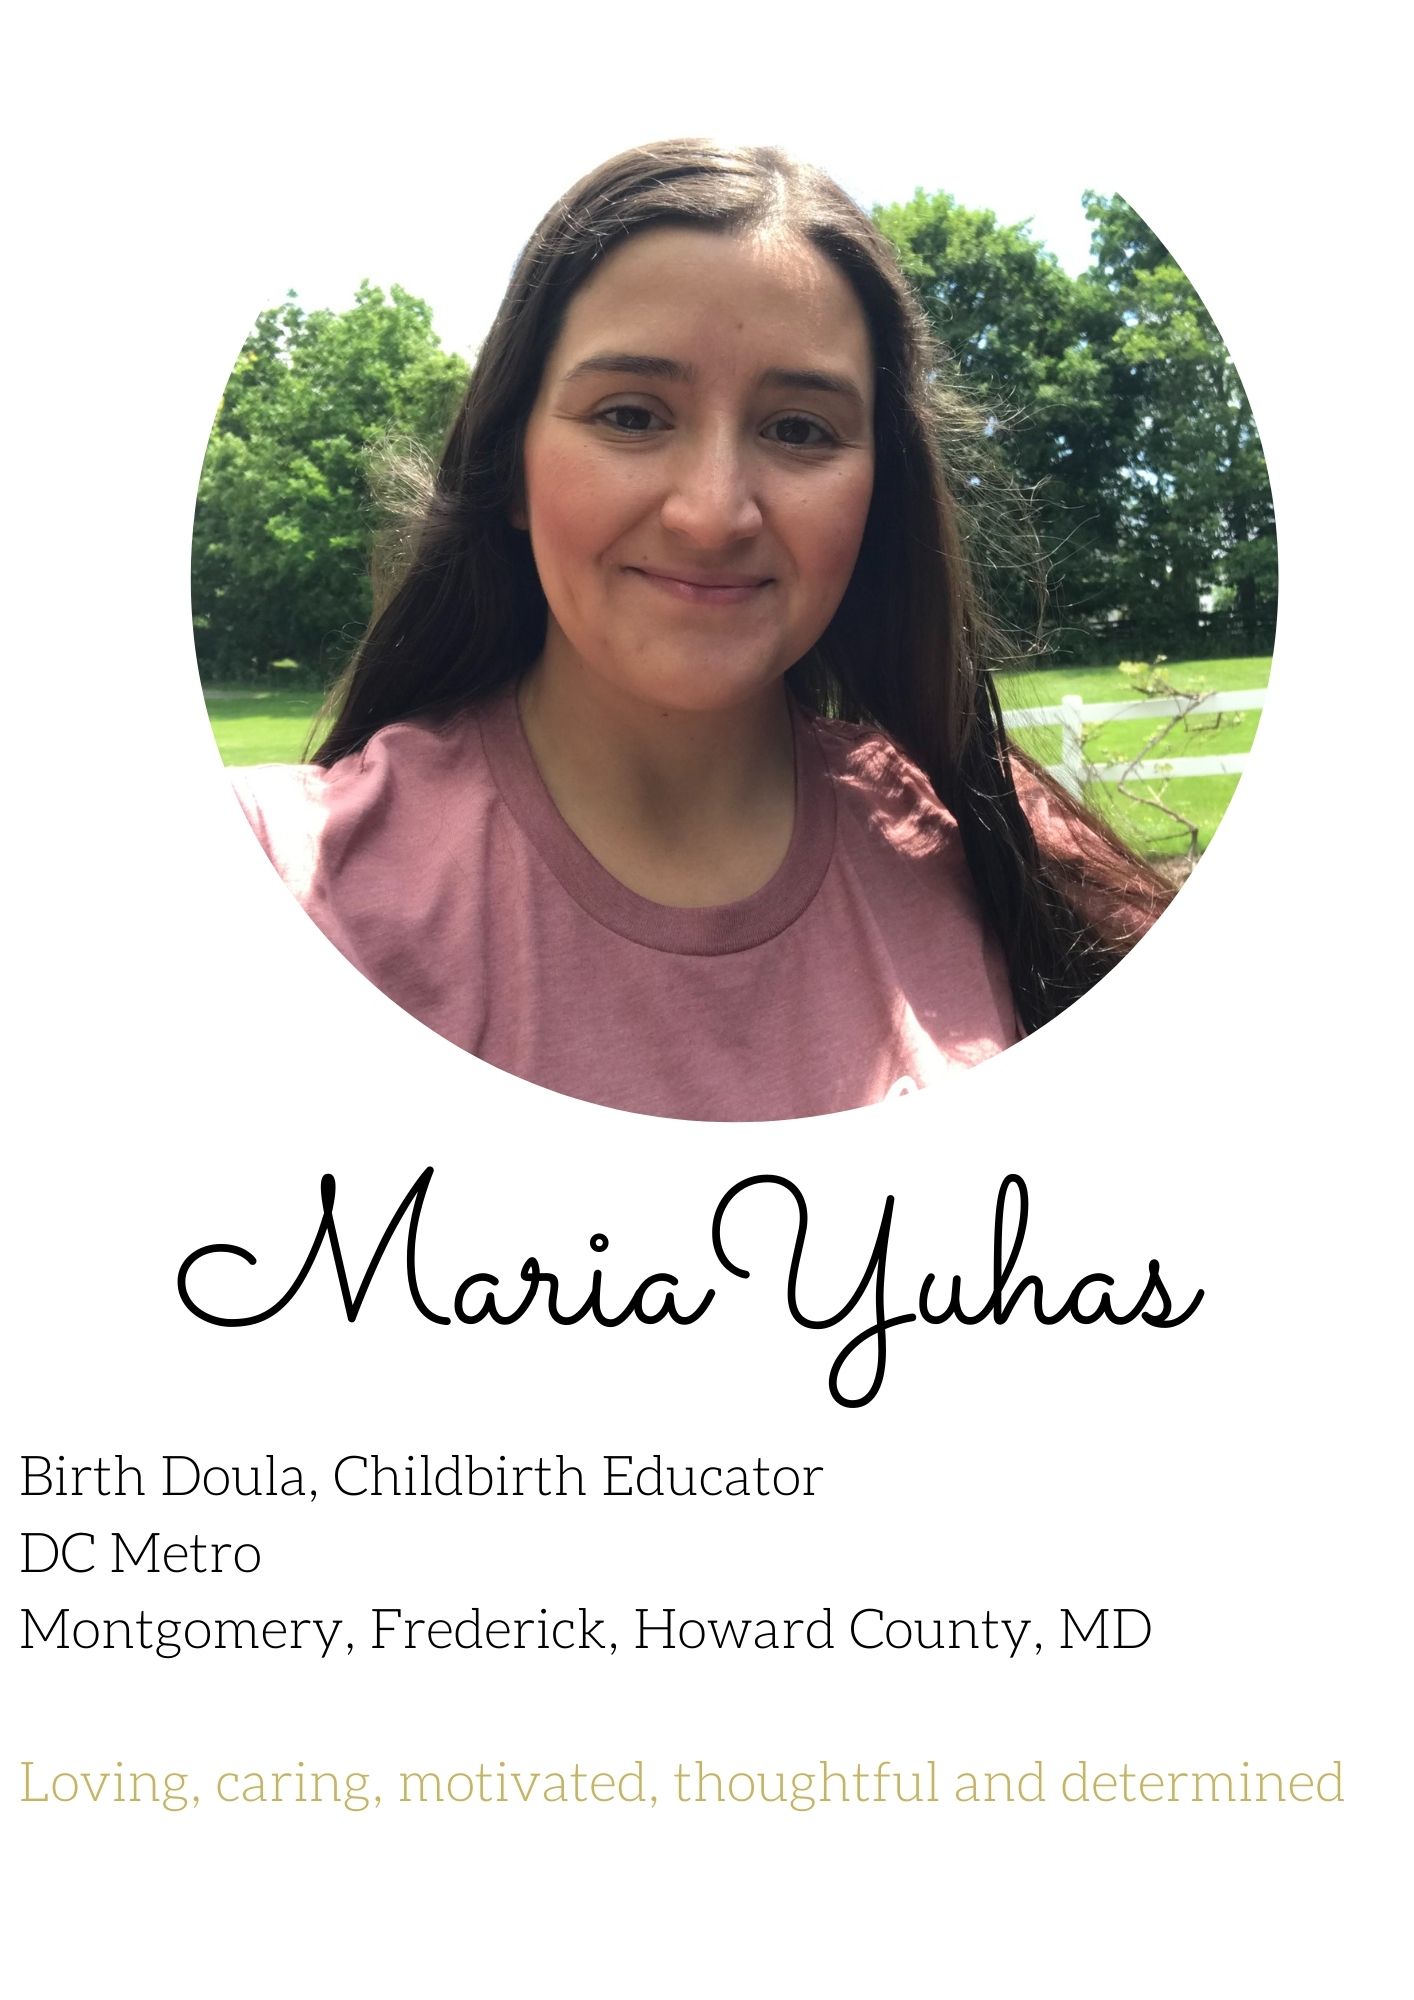 Maria Yuhas Birth Doula Childbirth Educator DC Metro Montgomery, Frederick, Howard County, MD loving, caring, motivated, thoughtful and determined